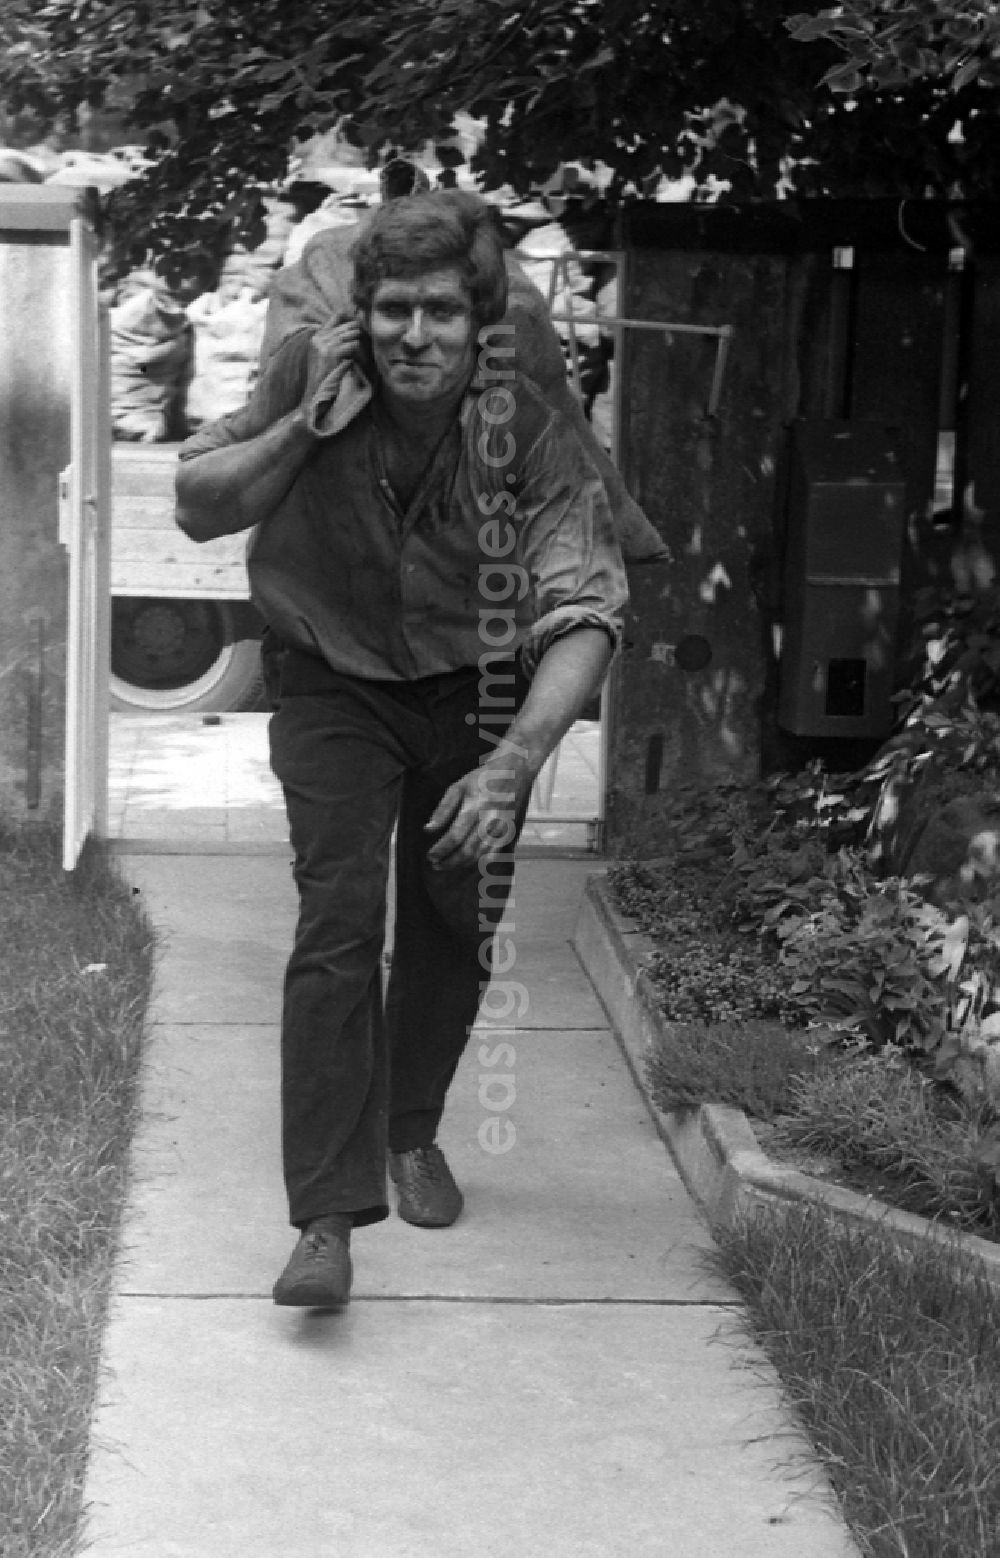 GDR picture archive: Berlin - Worker carries a sack of carbon in the district Mitte in Berlin Eastberlin on the territory of the former GDR, German Democratic Republic